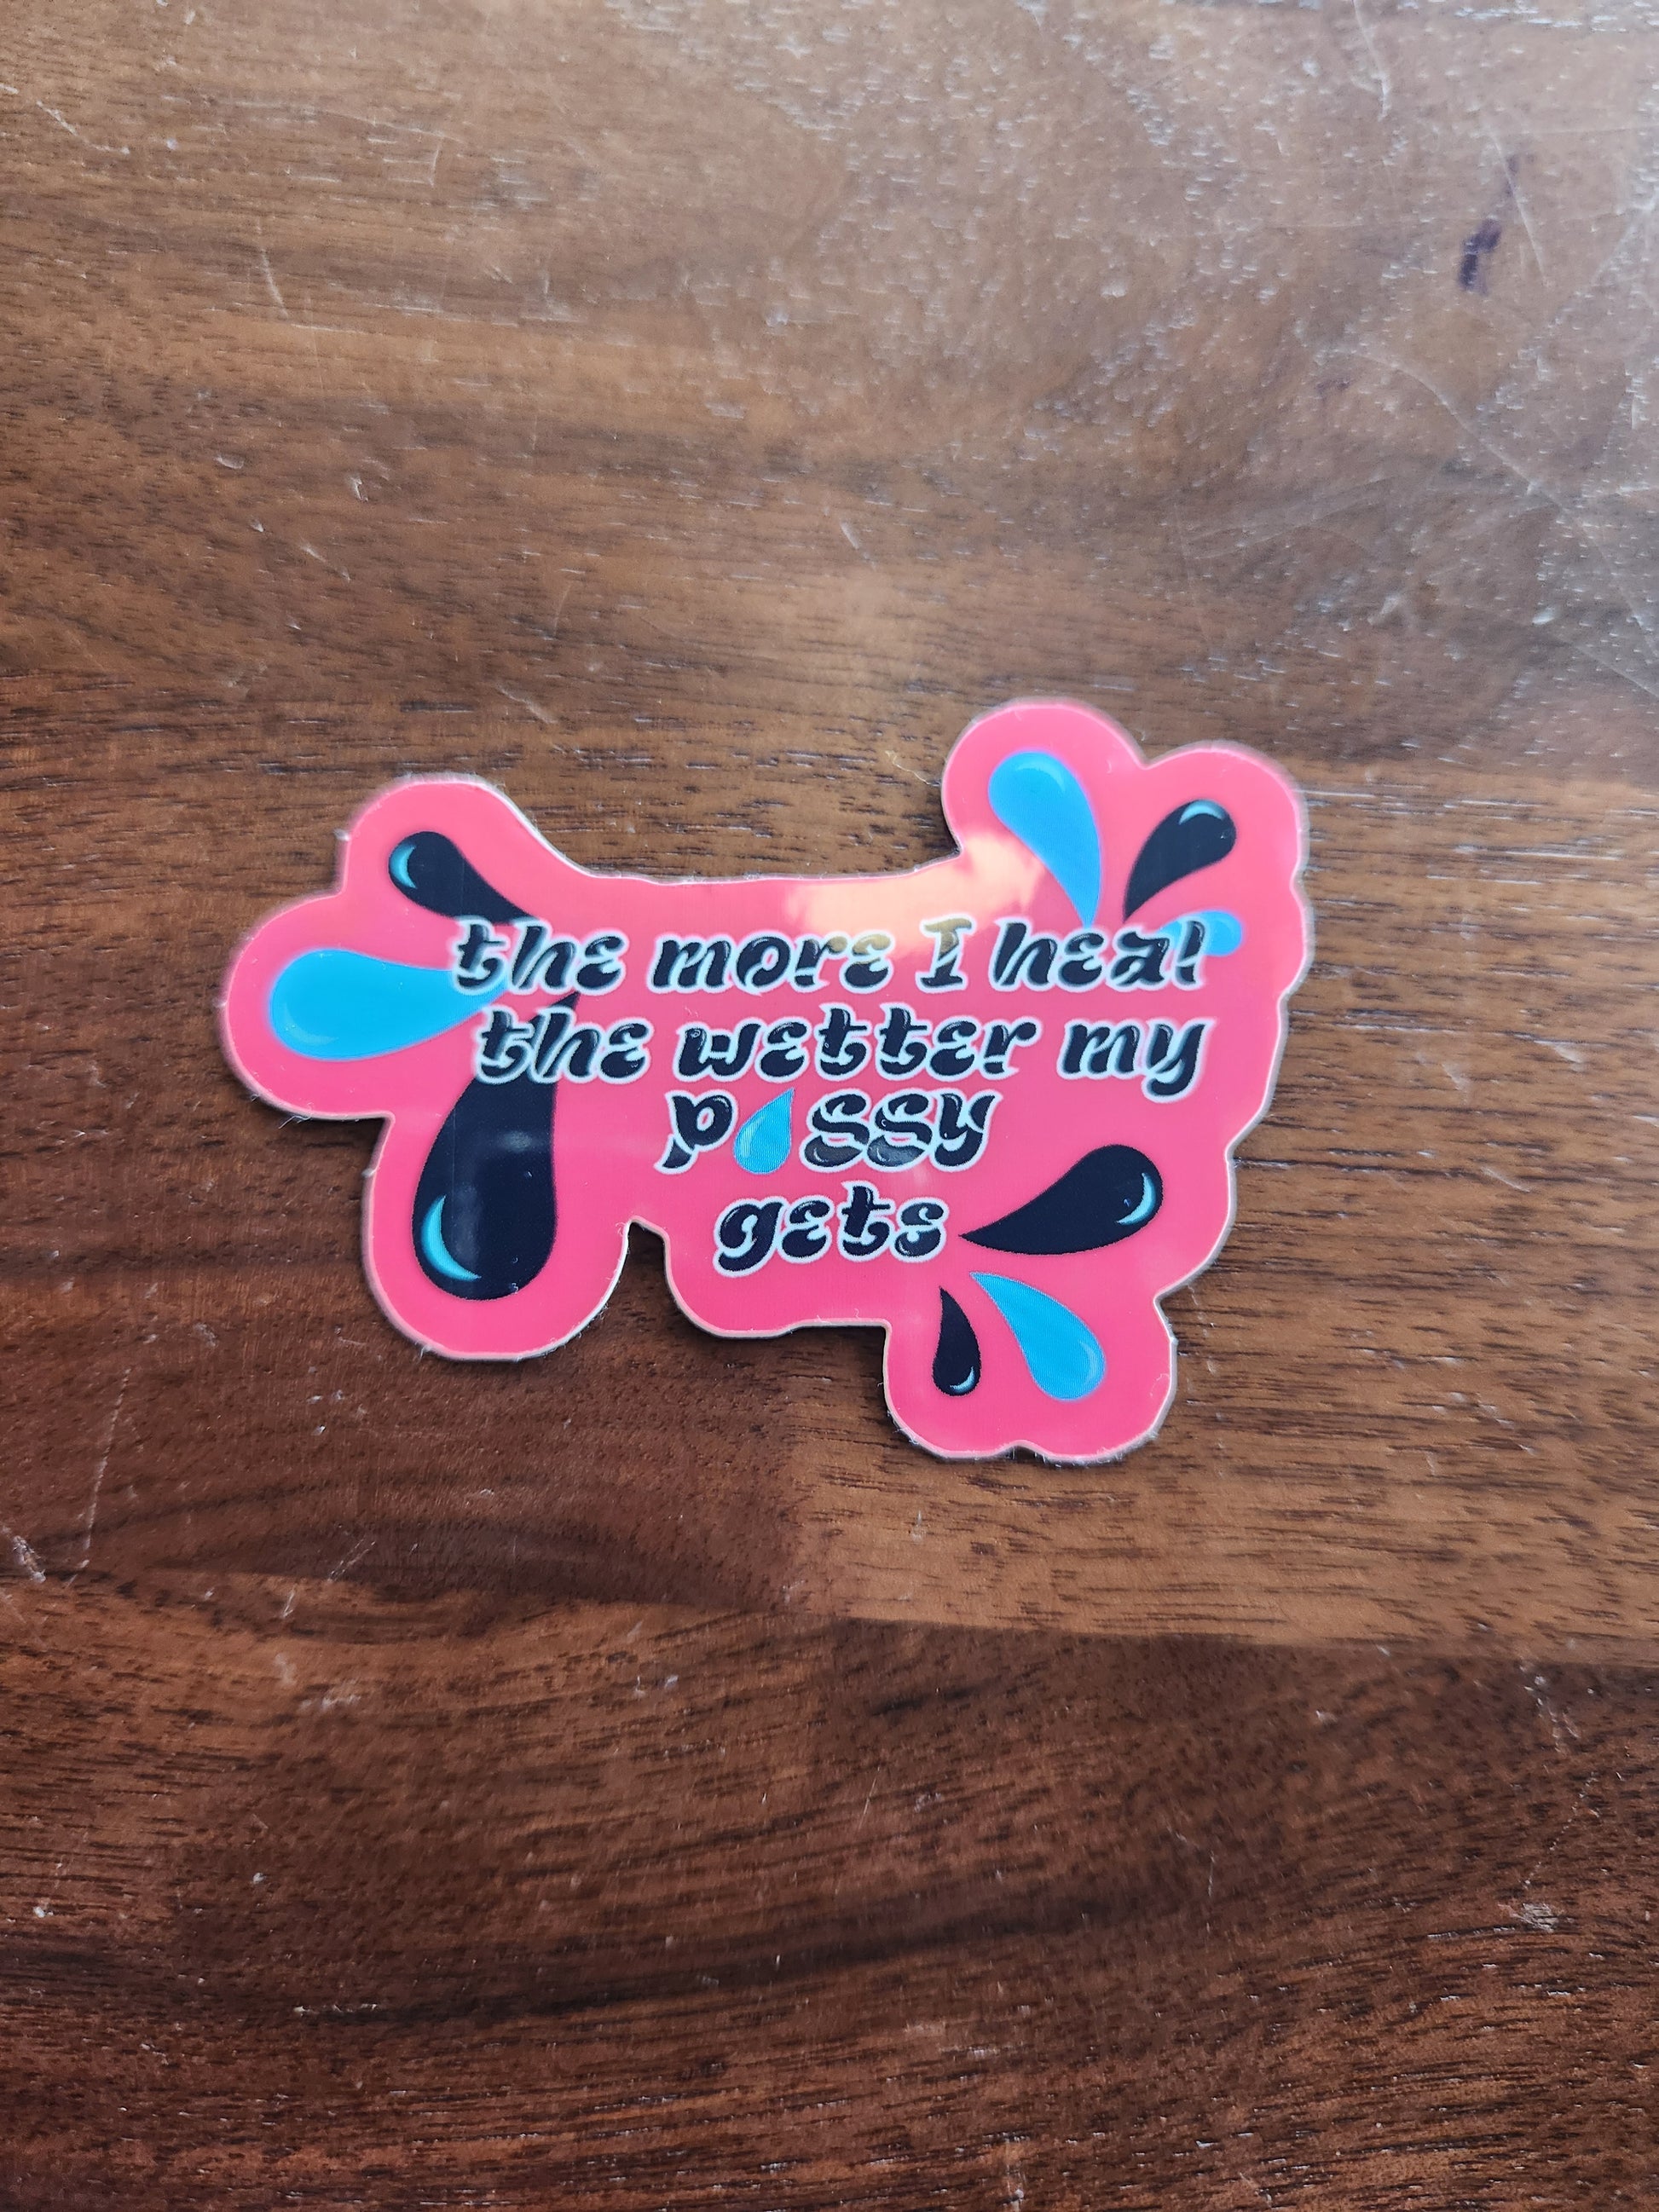 A pink sticker is the shape of a water splash, laying on a wooden table

The words are black and outlined in white. They say: "the more I heal the wetter my p-u-s-s-y gets"

In the corners are black and blue water droplets 